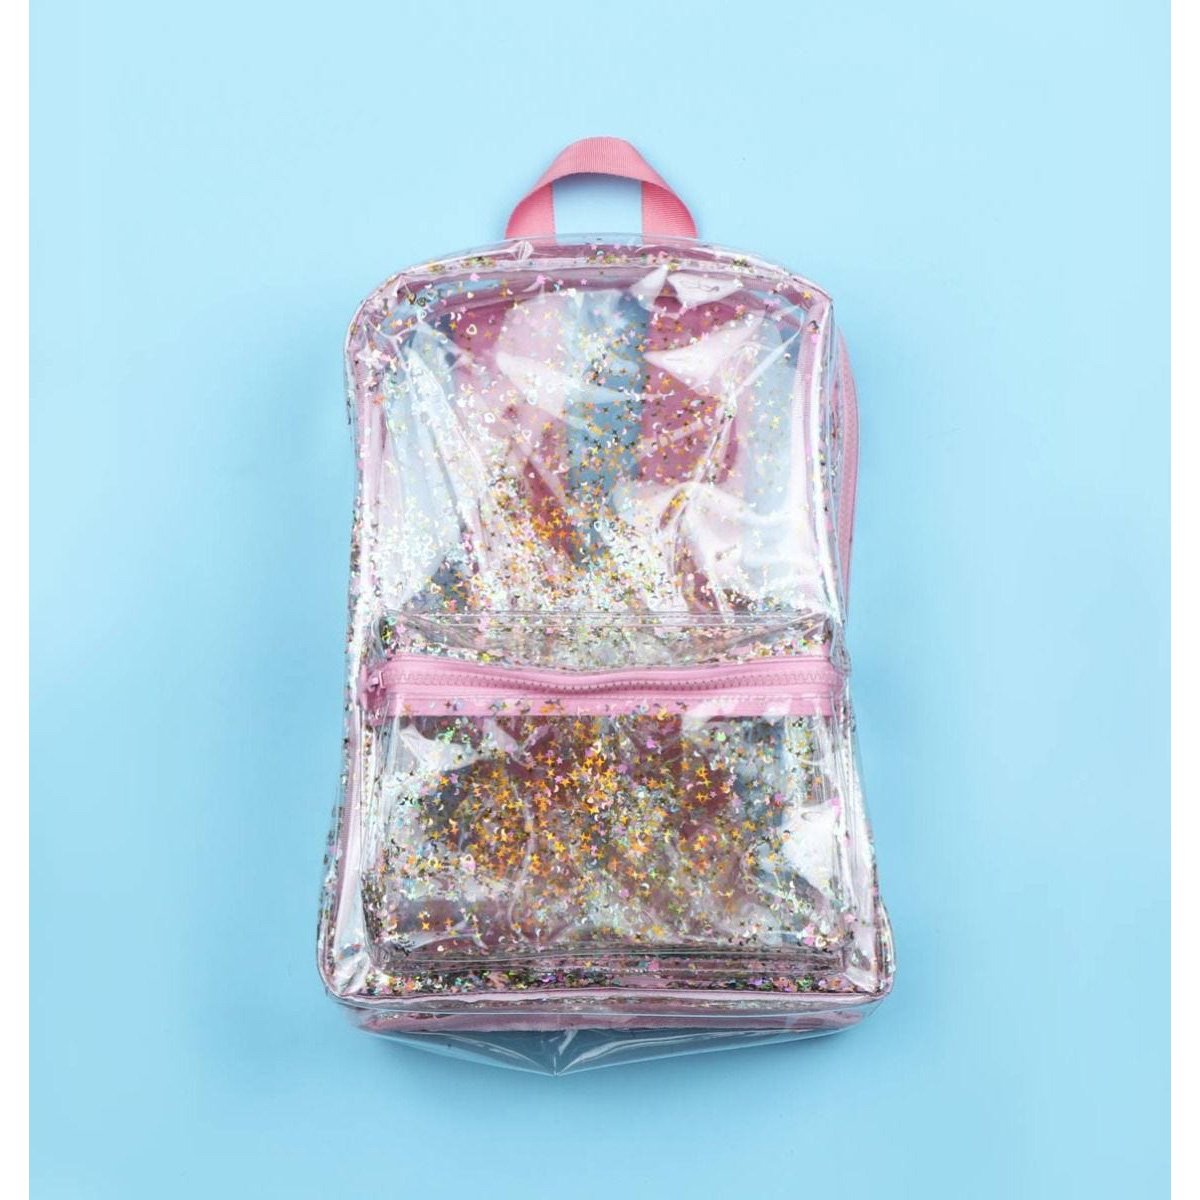 a-little-lovely-company-backpack-glitter-transparent-pink- (7)